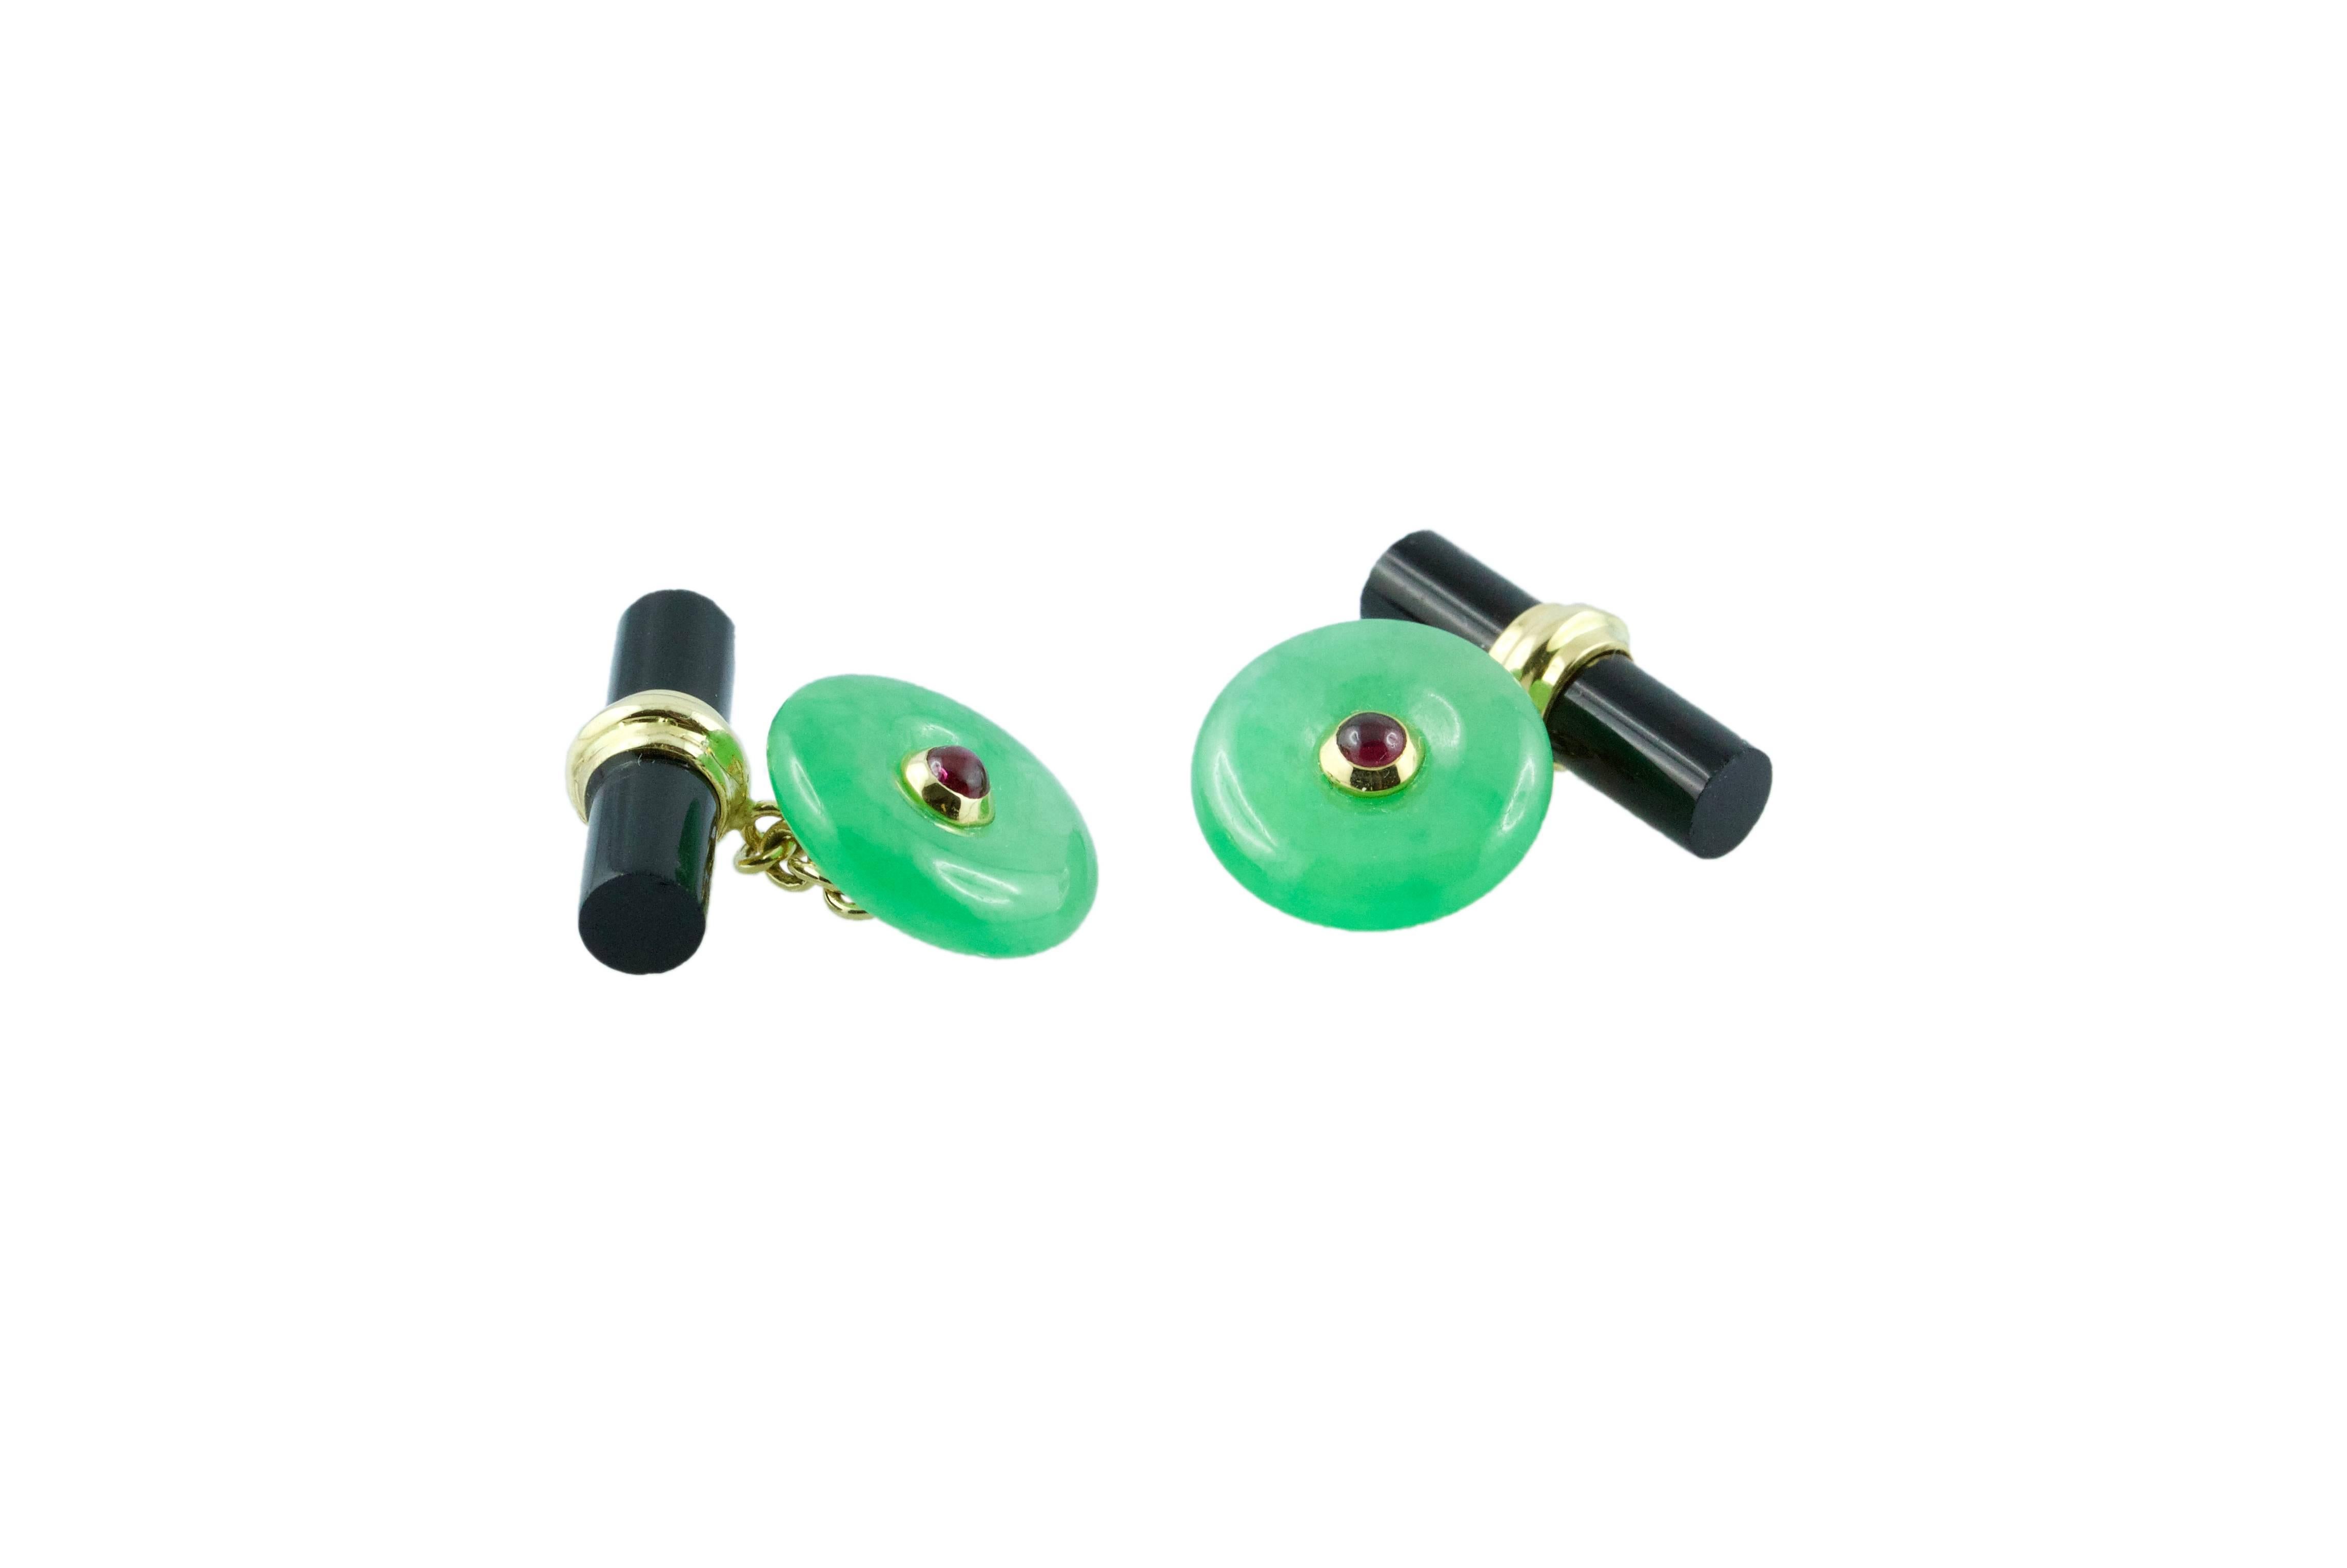 These exquisite cufflinks feature a striking contrasting color combination produced by the vivid green of the front face in jade, shaped as a circle with a cabochon ruby adorning its center, and the dark black of the onyx toggle, carved as a